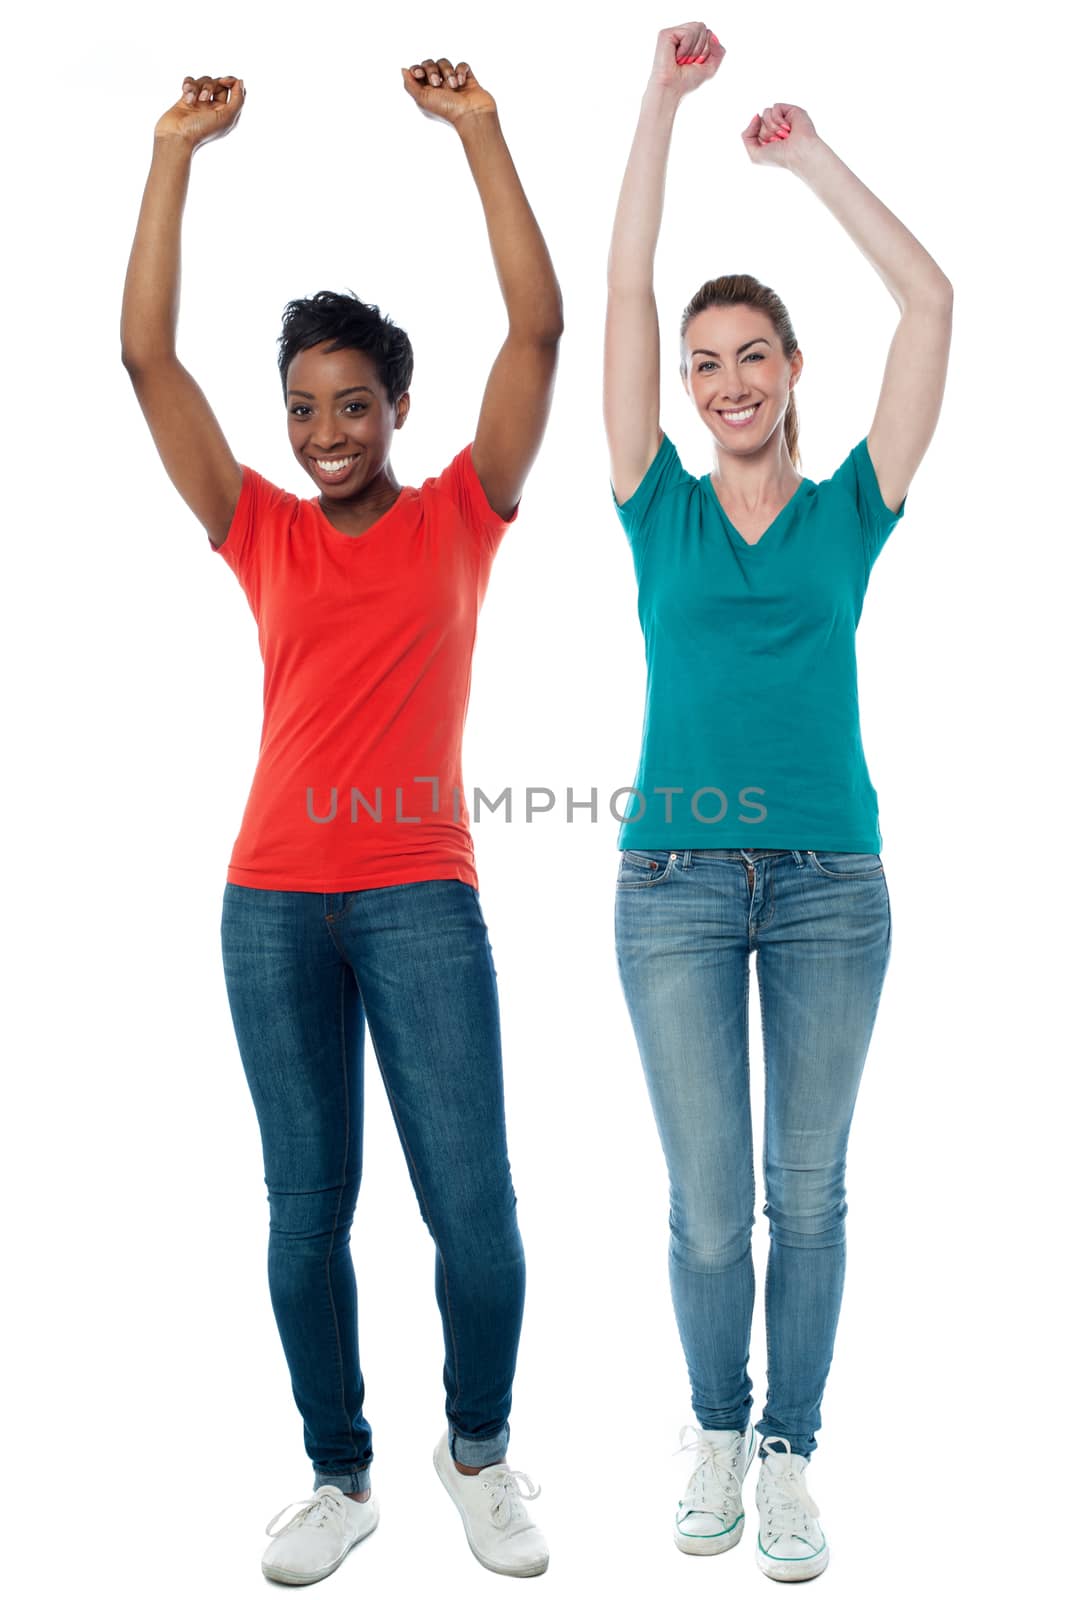 Women raising their arms up in excitement